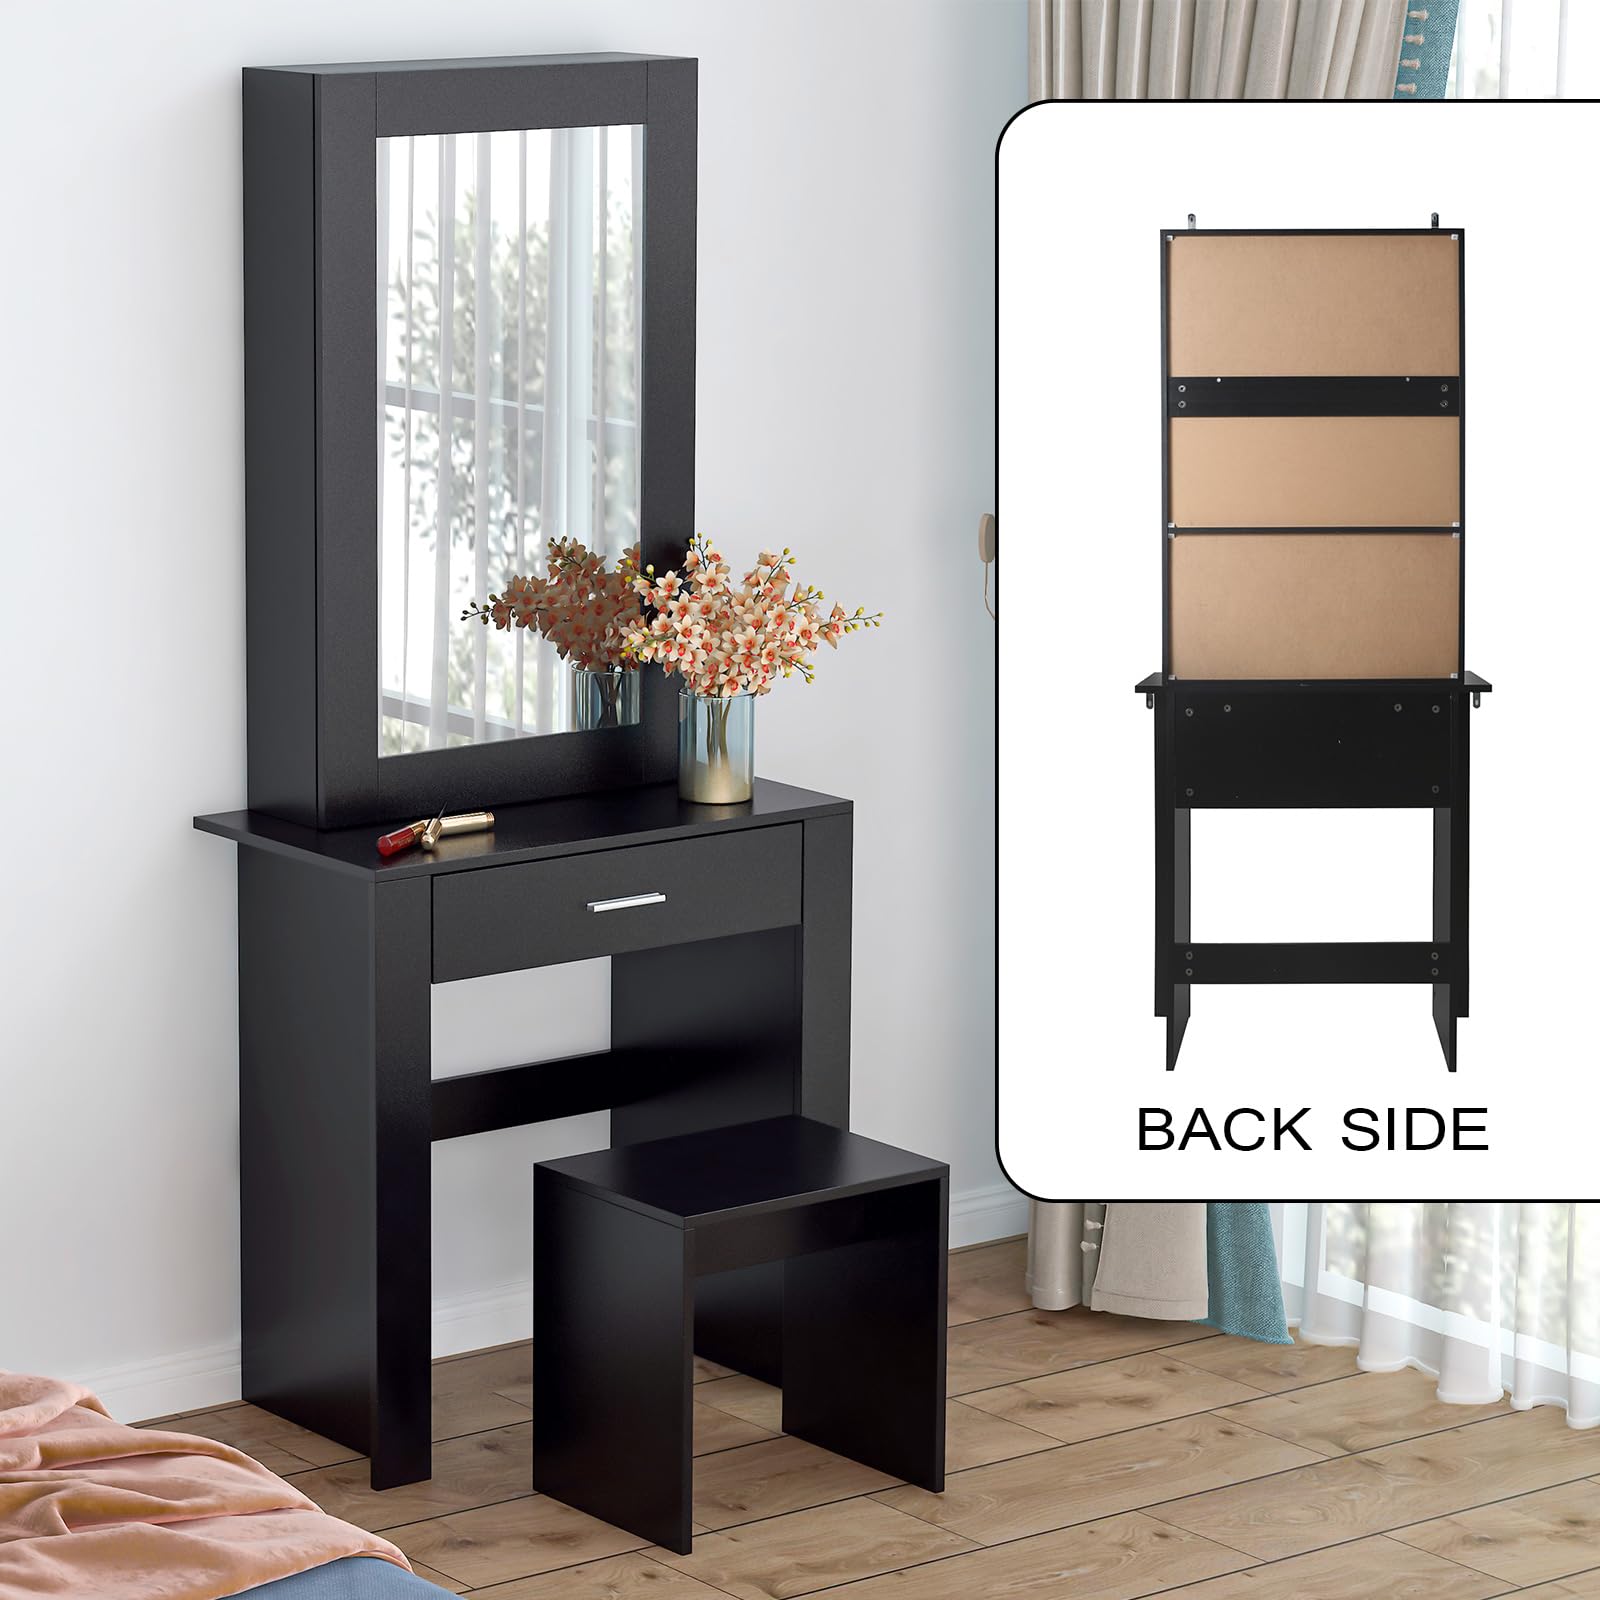 PHPMFTOS Makeup Vanity Desk with Mirror and Stool Bedroom Dressing Table with Storage Shelves Drawer Vanity Set for Women (Black)